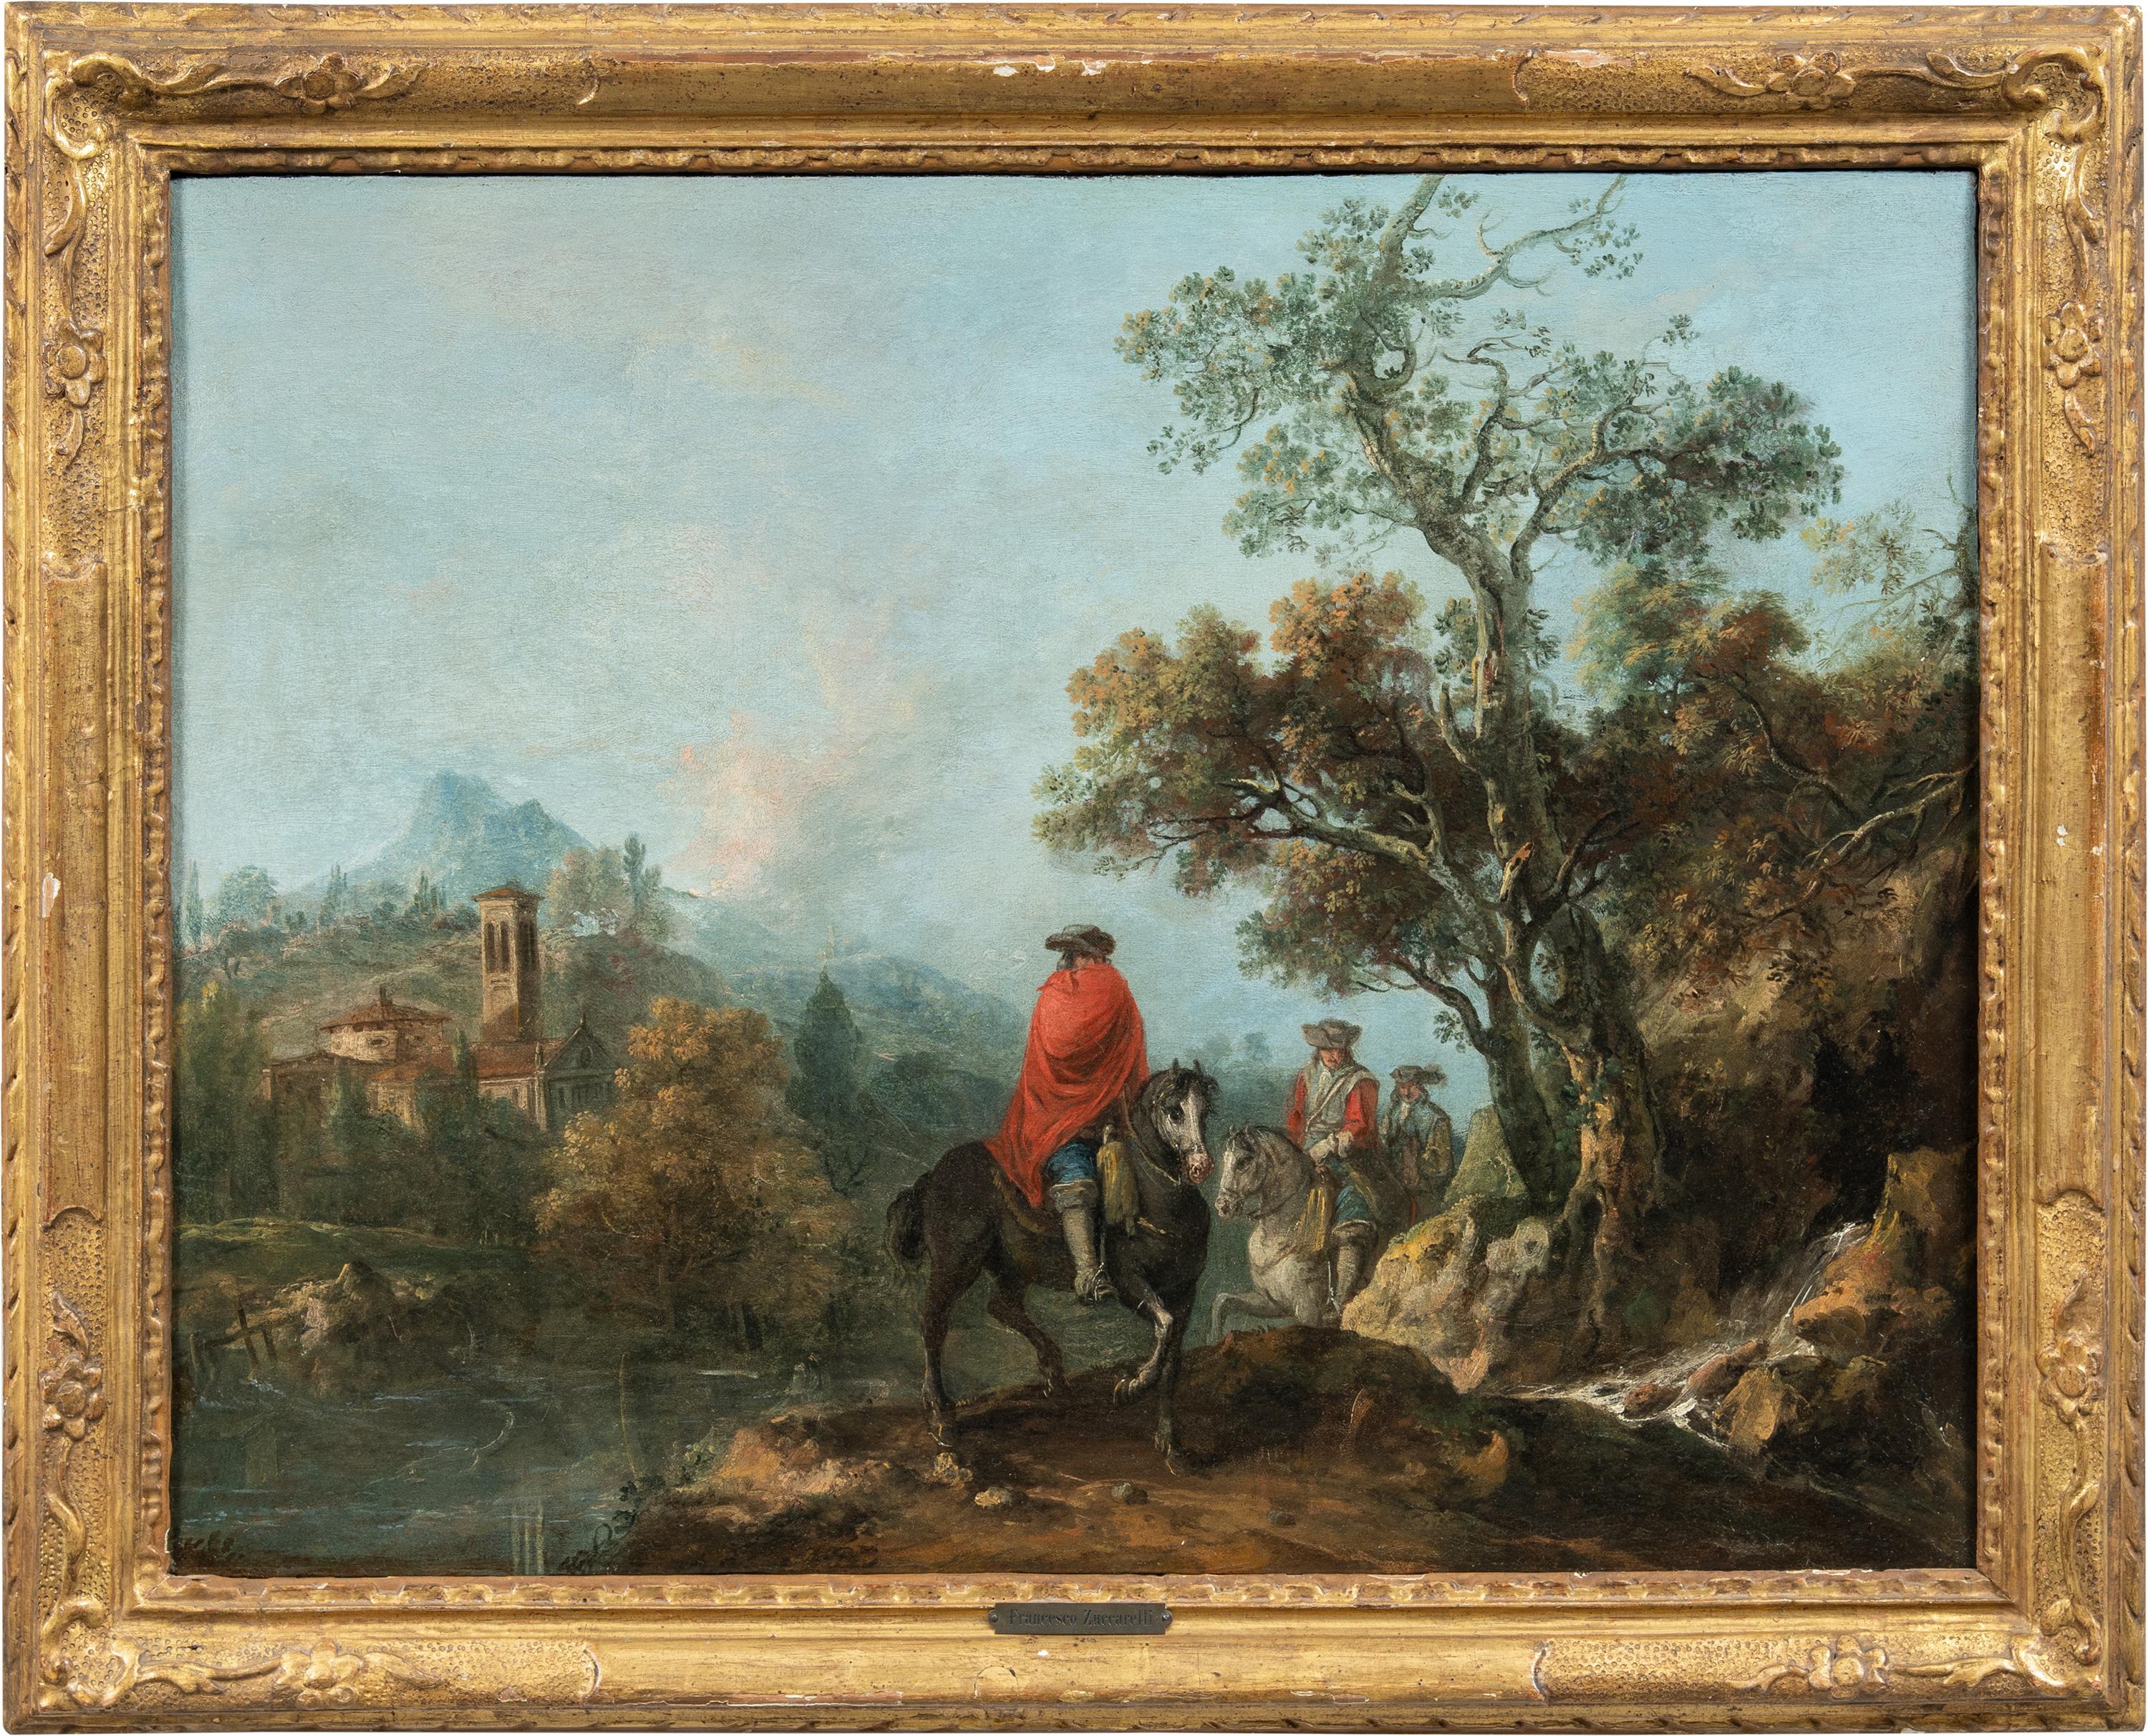 Francesco Zuccarelli (Pitigliano 1702 - Florence 1788) - River landscape with knights and medieval village.

53 x 70 cm without frame, 64.5 x 80.5 cm with frame.

Antique oil painting on canvas, in a carved and gilded wooden frame.

We thank prof.